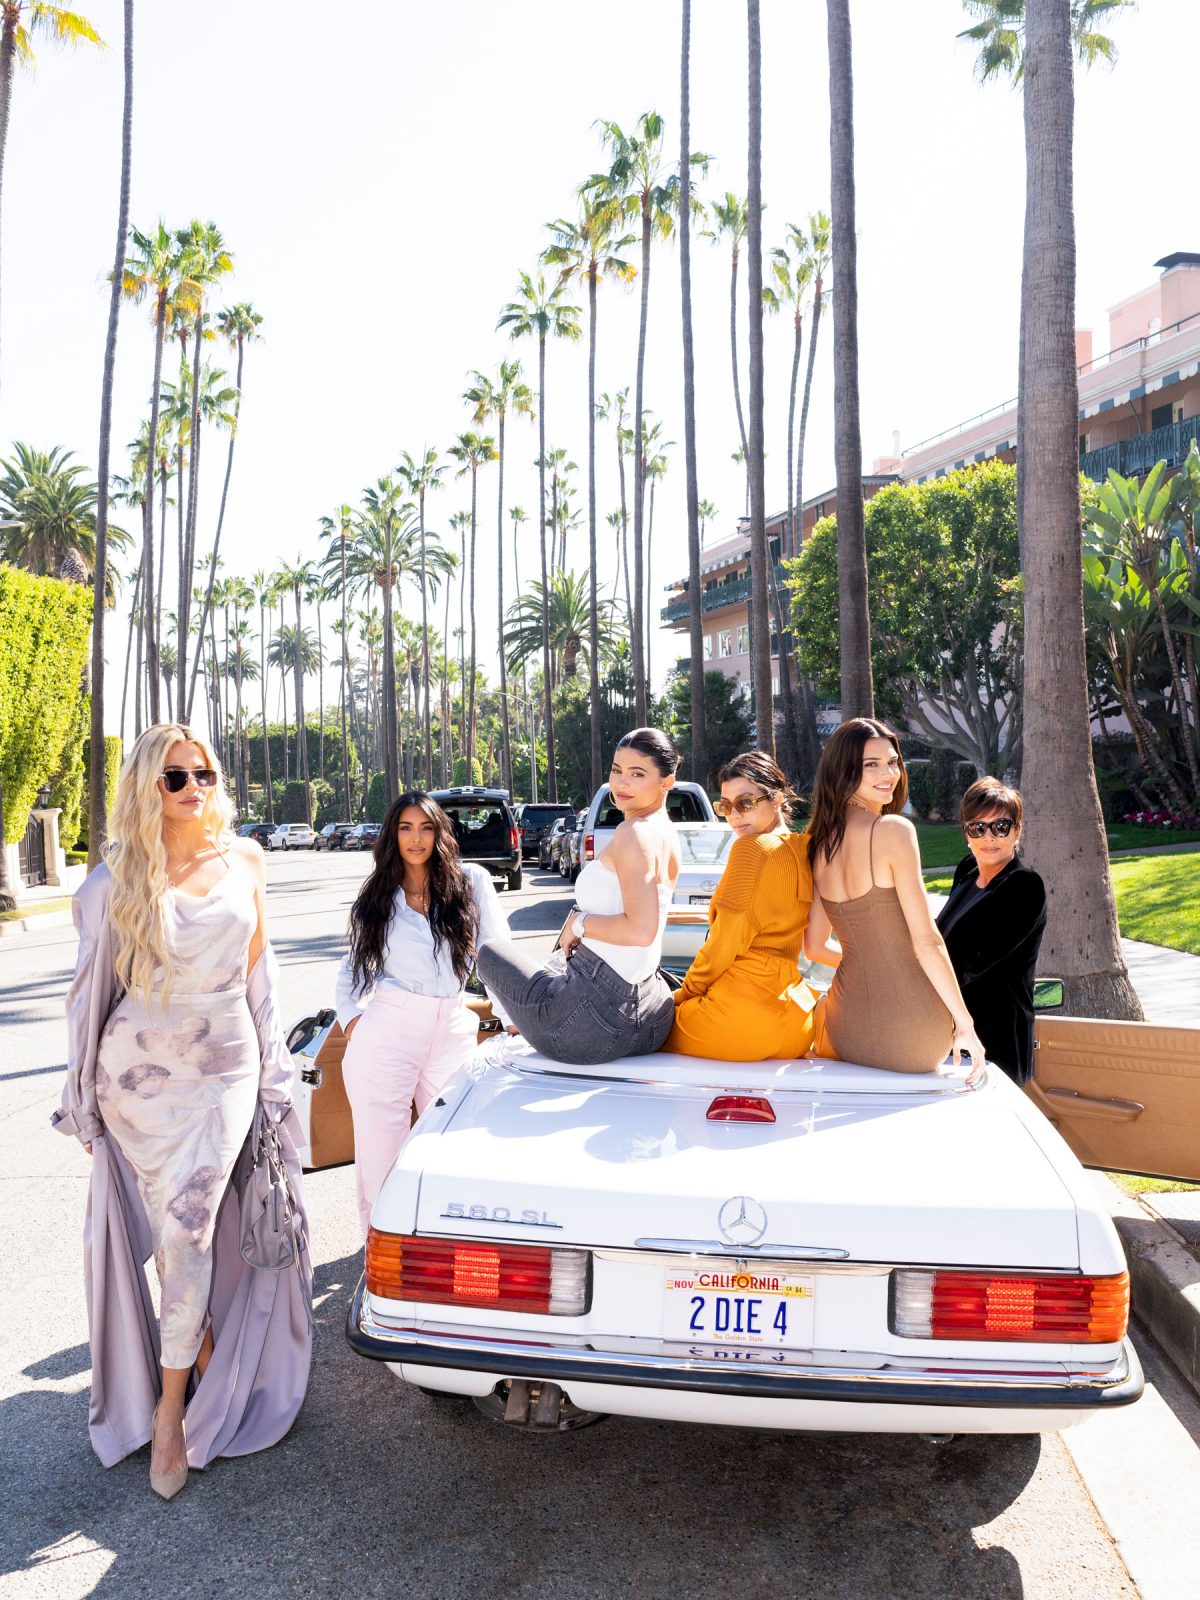 Kris Jenner on her birthday with her daughters, Khloe, Kim, Kylie, Kourtney, and Kendall